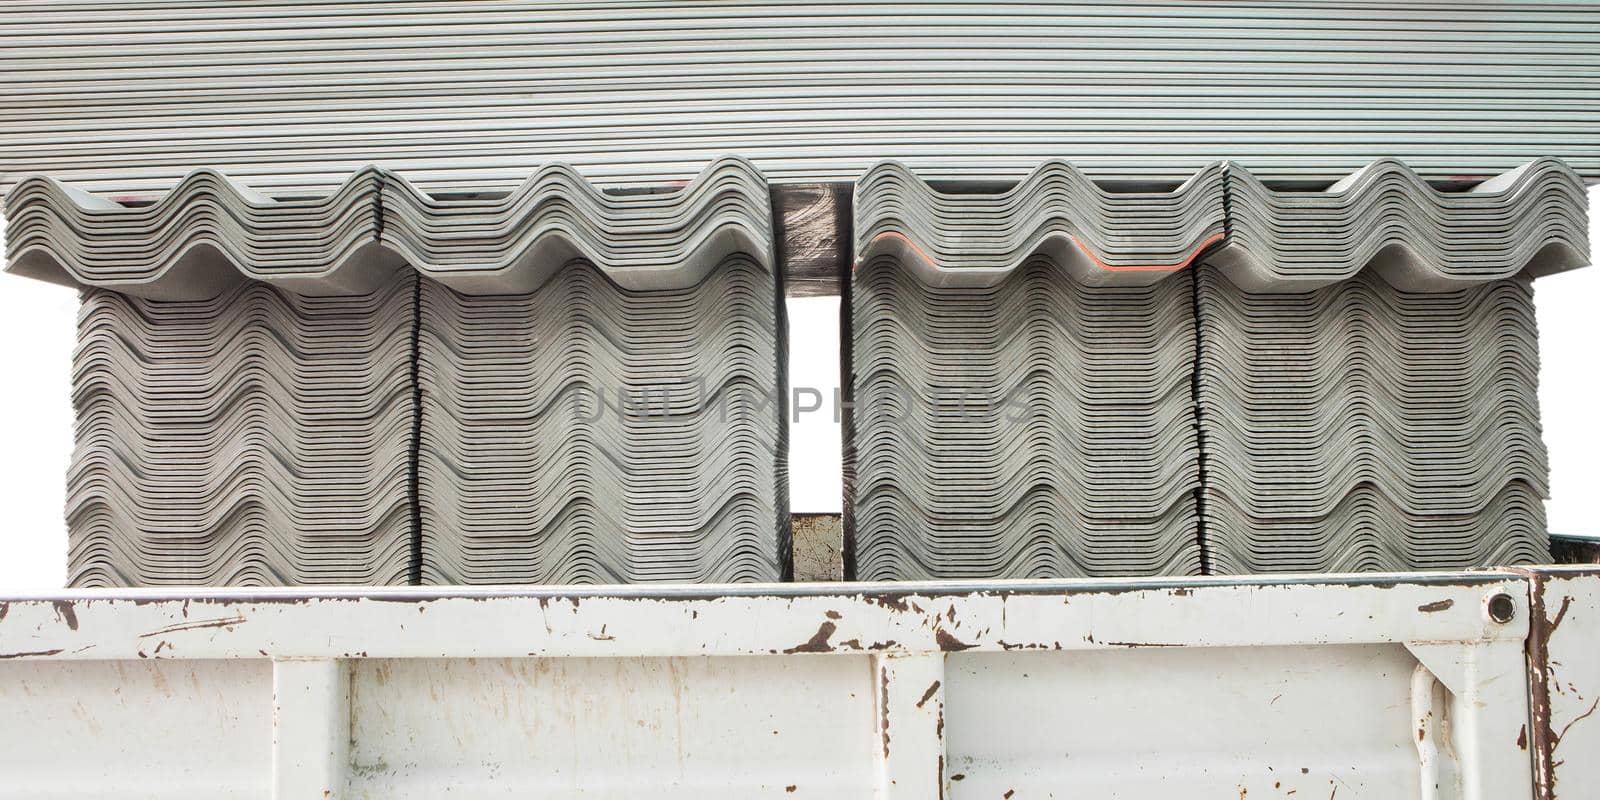 Roof Tiles in Material Store